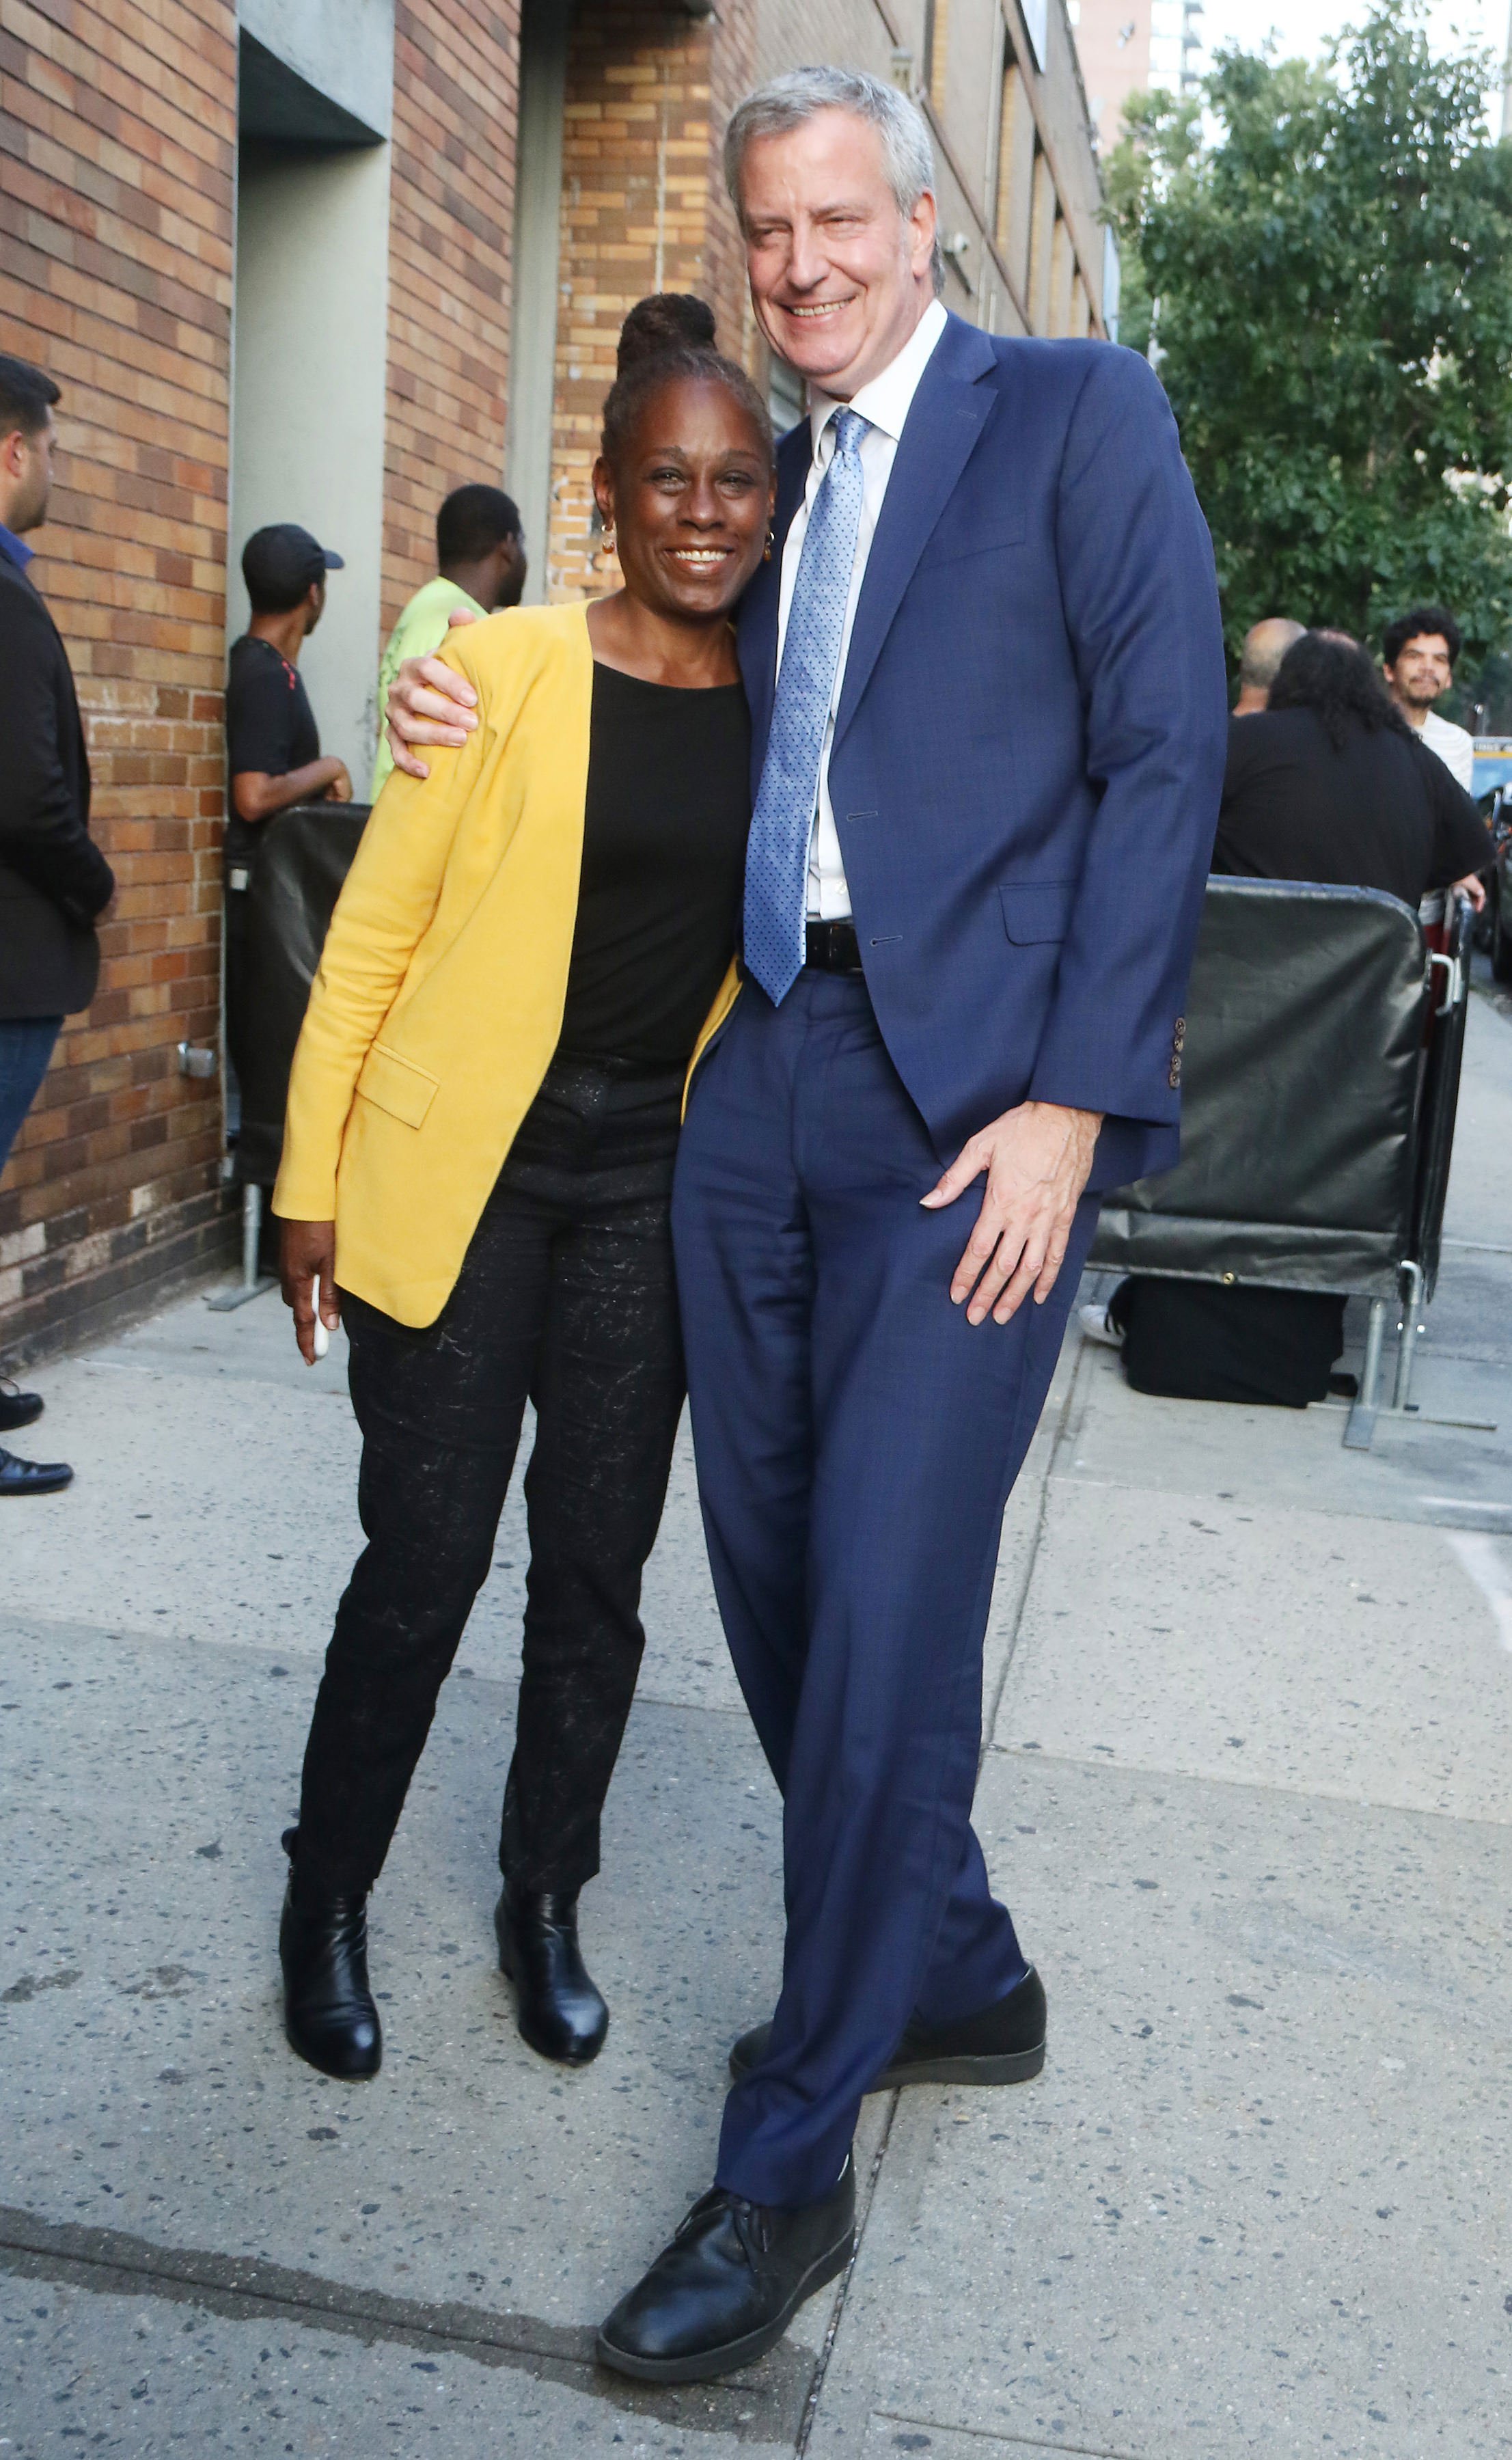  Chirlane McCray and Mayor of New York City and Presidential Candidate Bill de Blasio are seen on August 14, 2019 in New York City | Photo: GettyImages